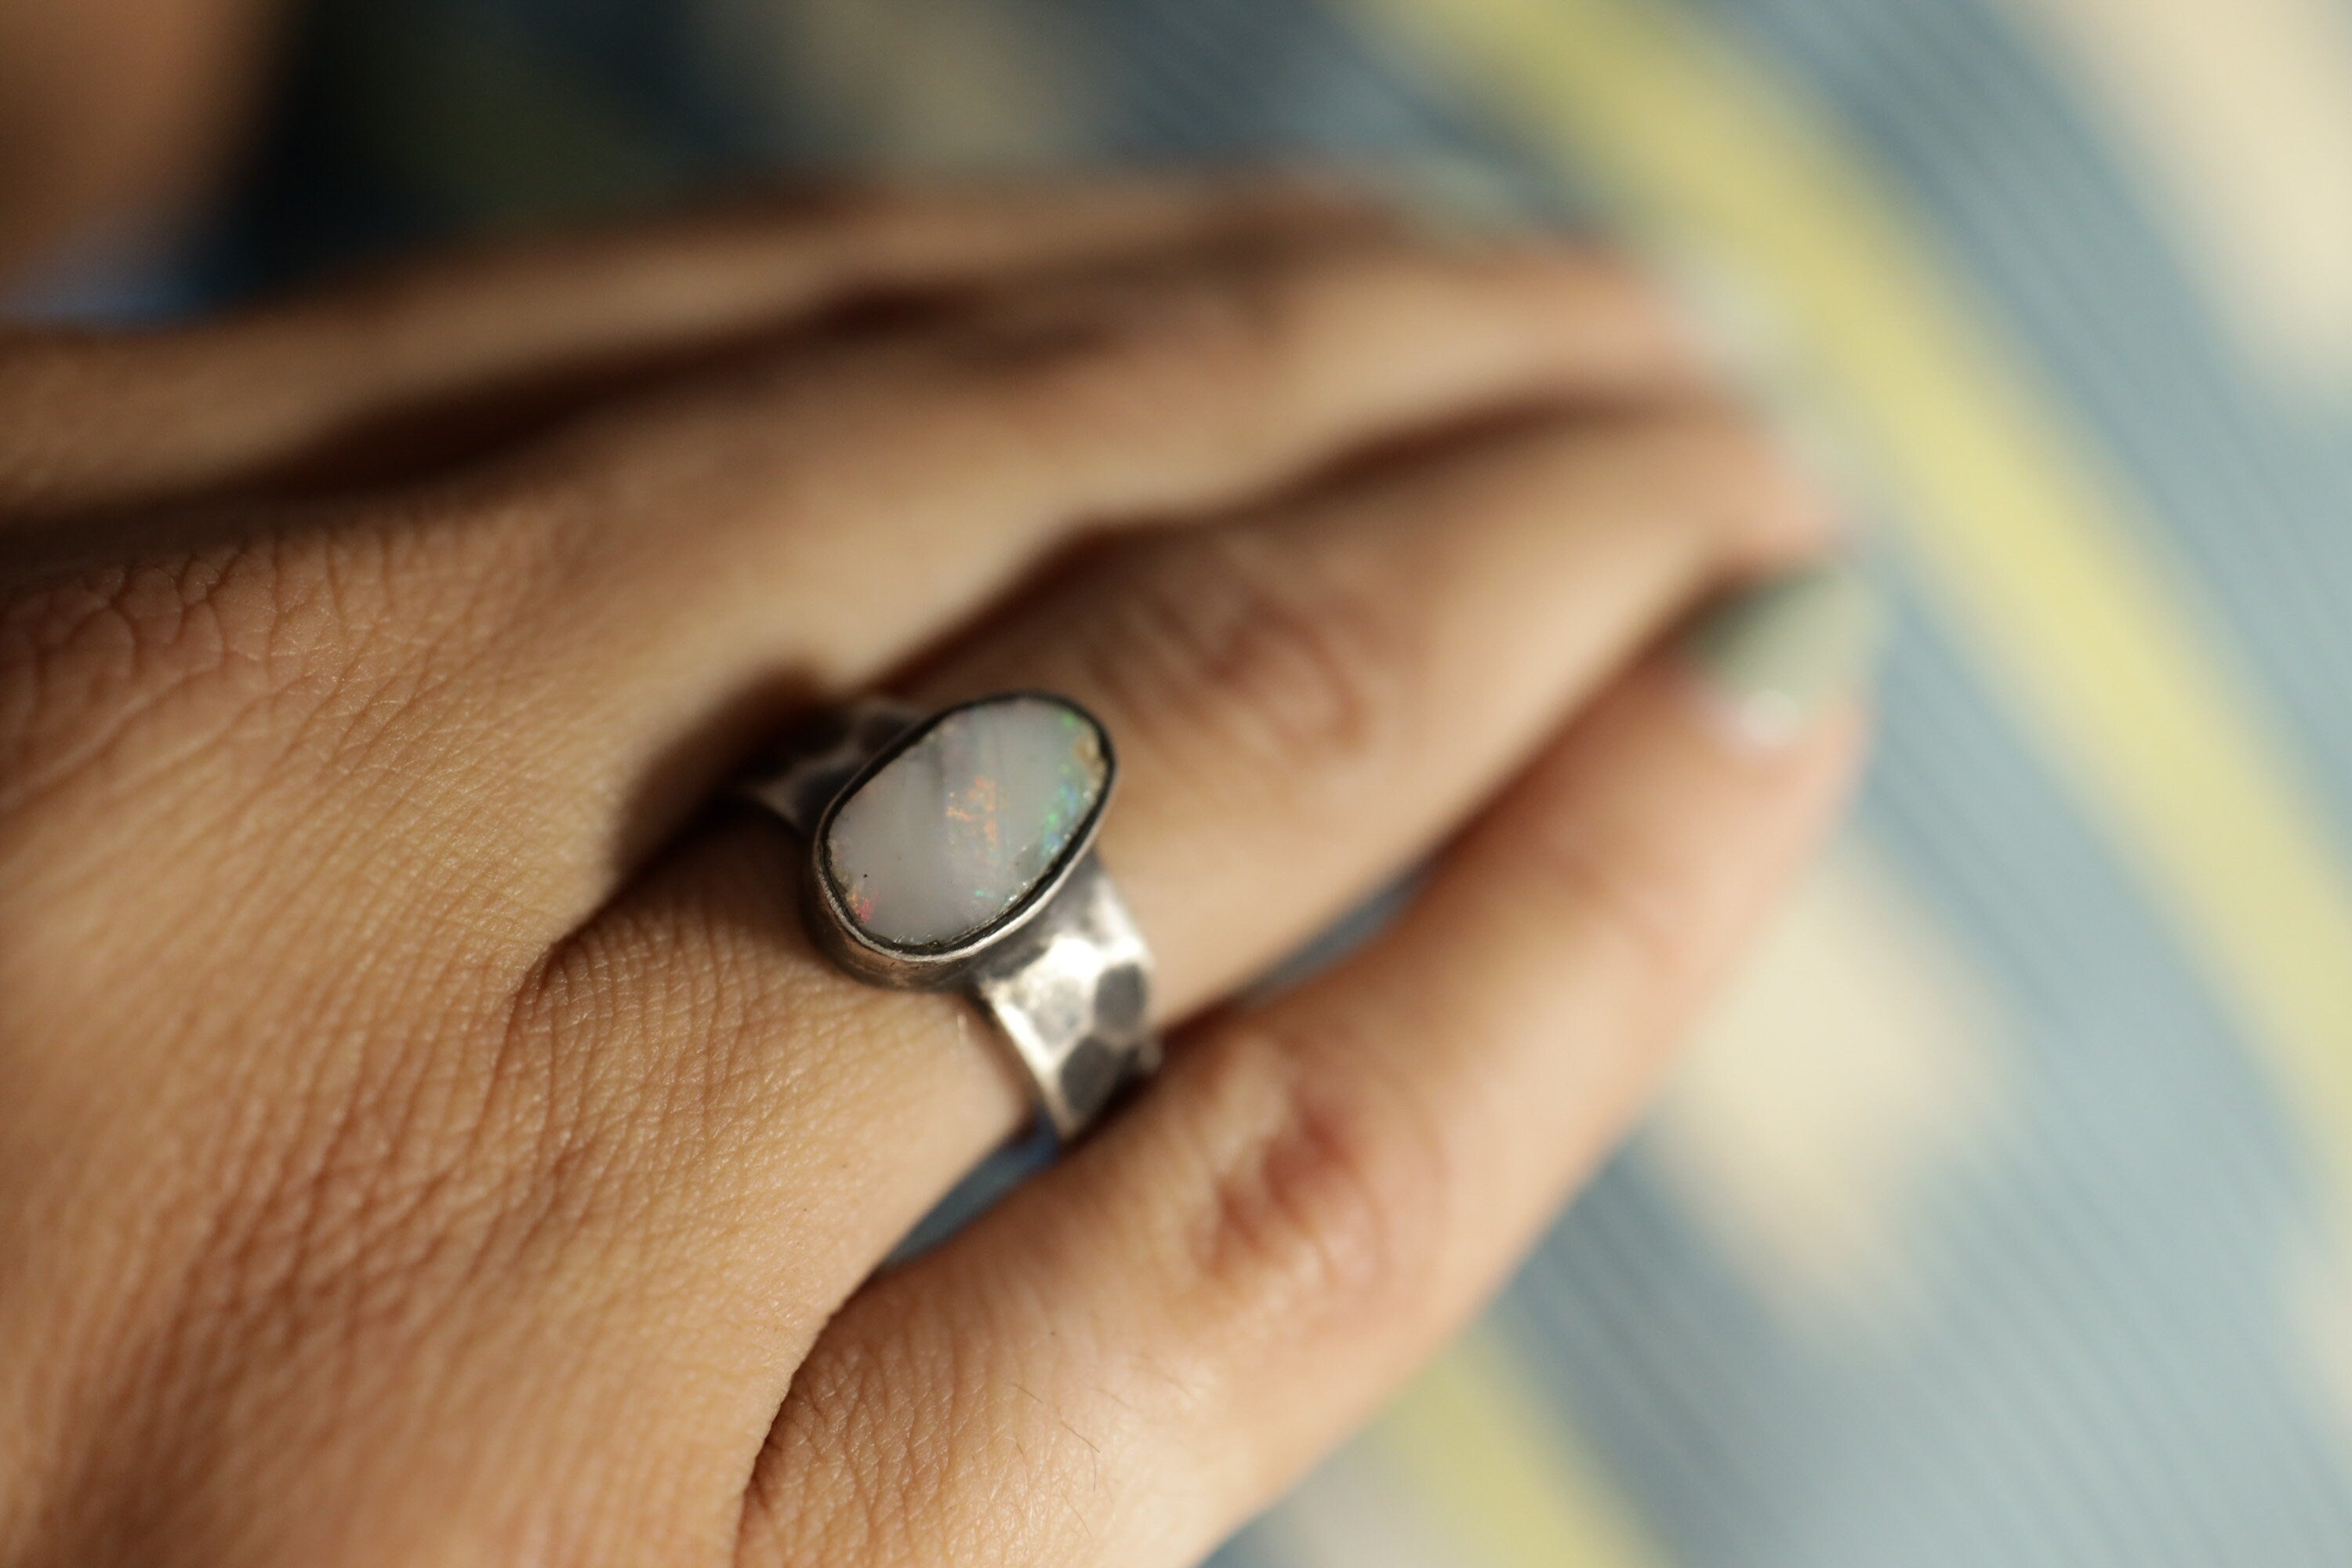 Enchanted Spectrum: Sterling Silver Ring with Australian Lightning Ridge Gem Opal - Textured & Oxidised - Size 7 - NO/01